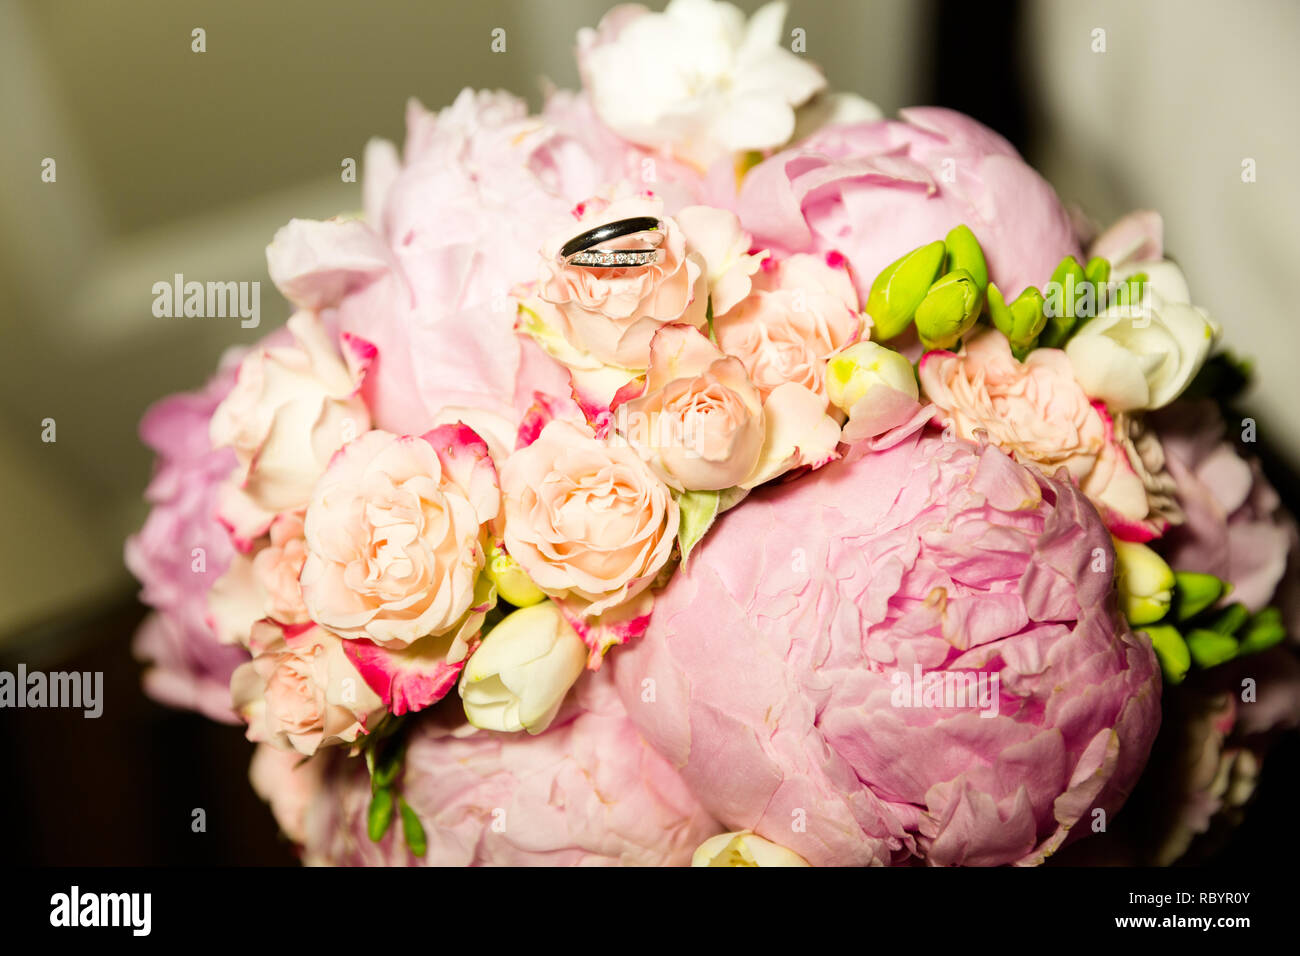 A pair of wedding gold rings on a bouquet of pink flowers, close up shot Stock Photo